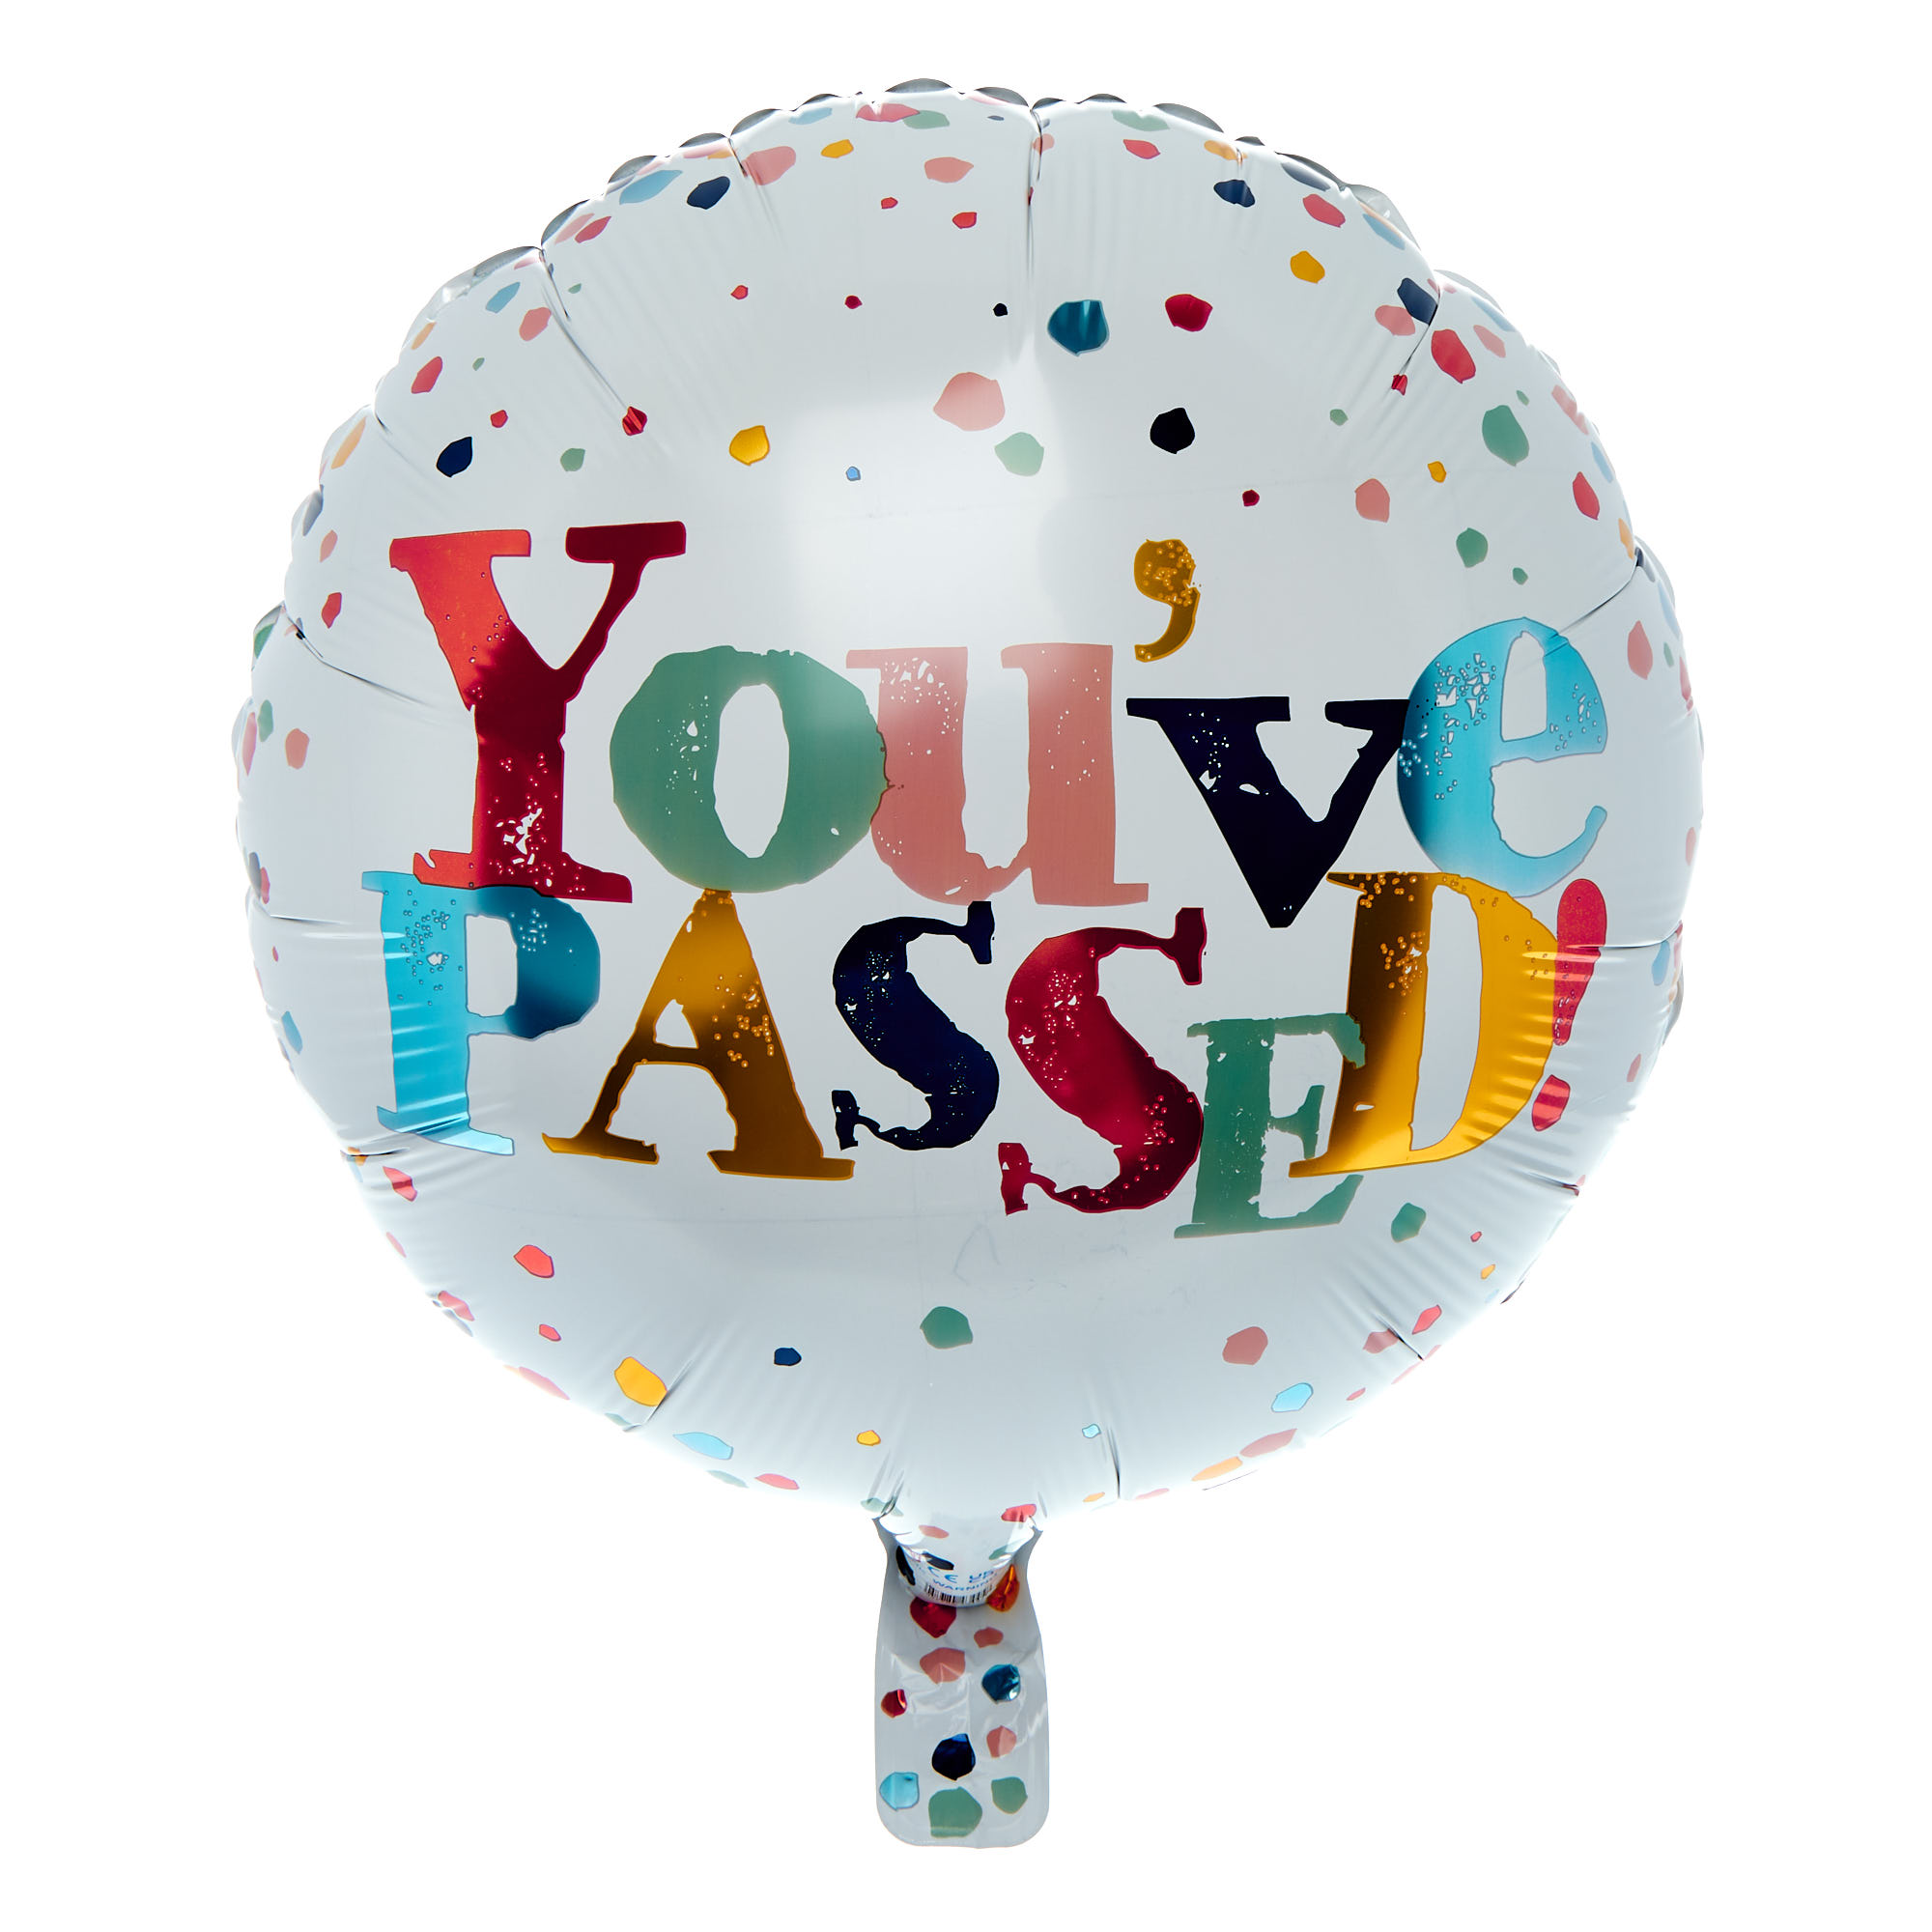 You've Passed Balloon & Lindt Chocolate Box - FREE GIFT CARD!